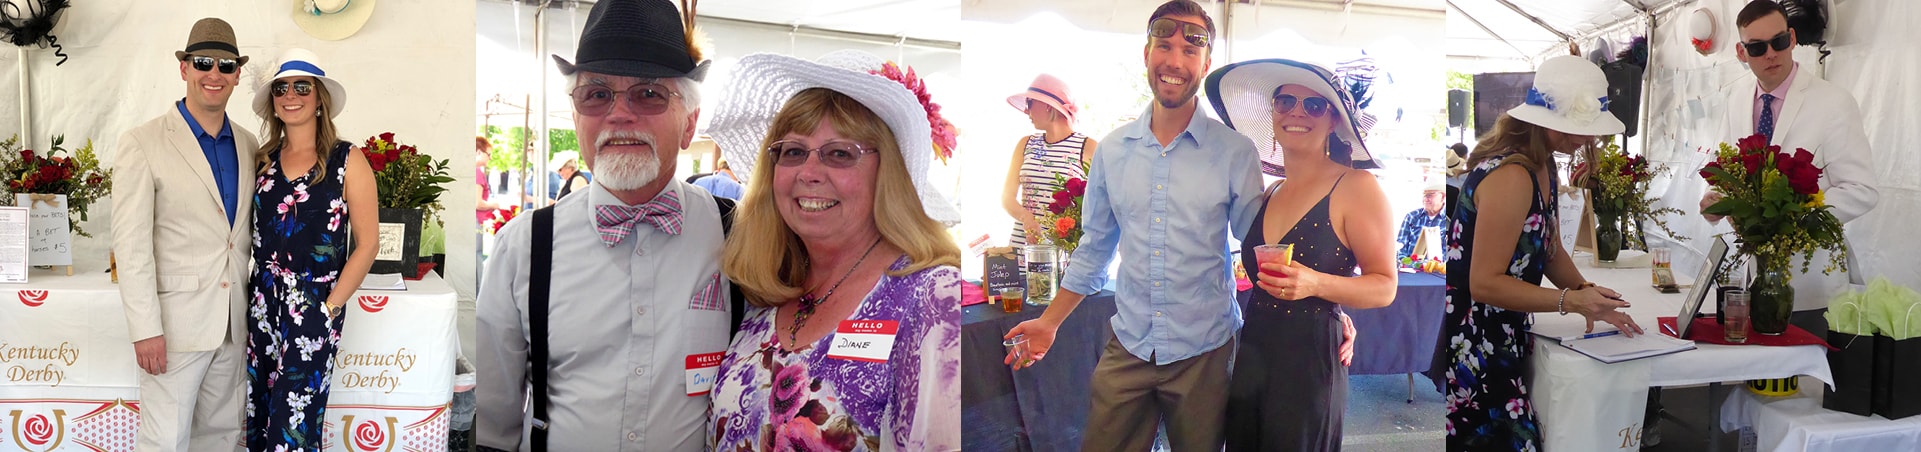 A collage of photos showing Distinctive Dental Care's Annual Kentucky Derby Party